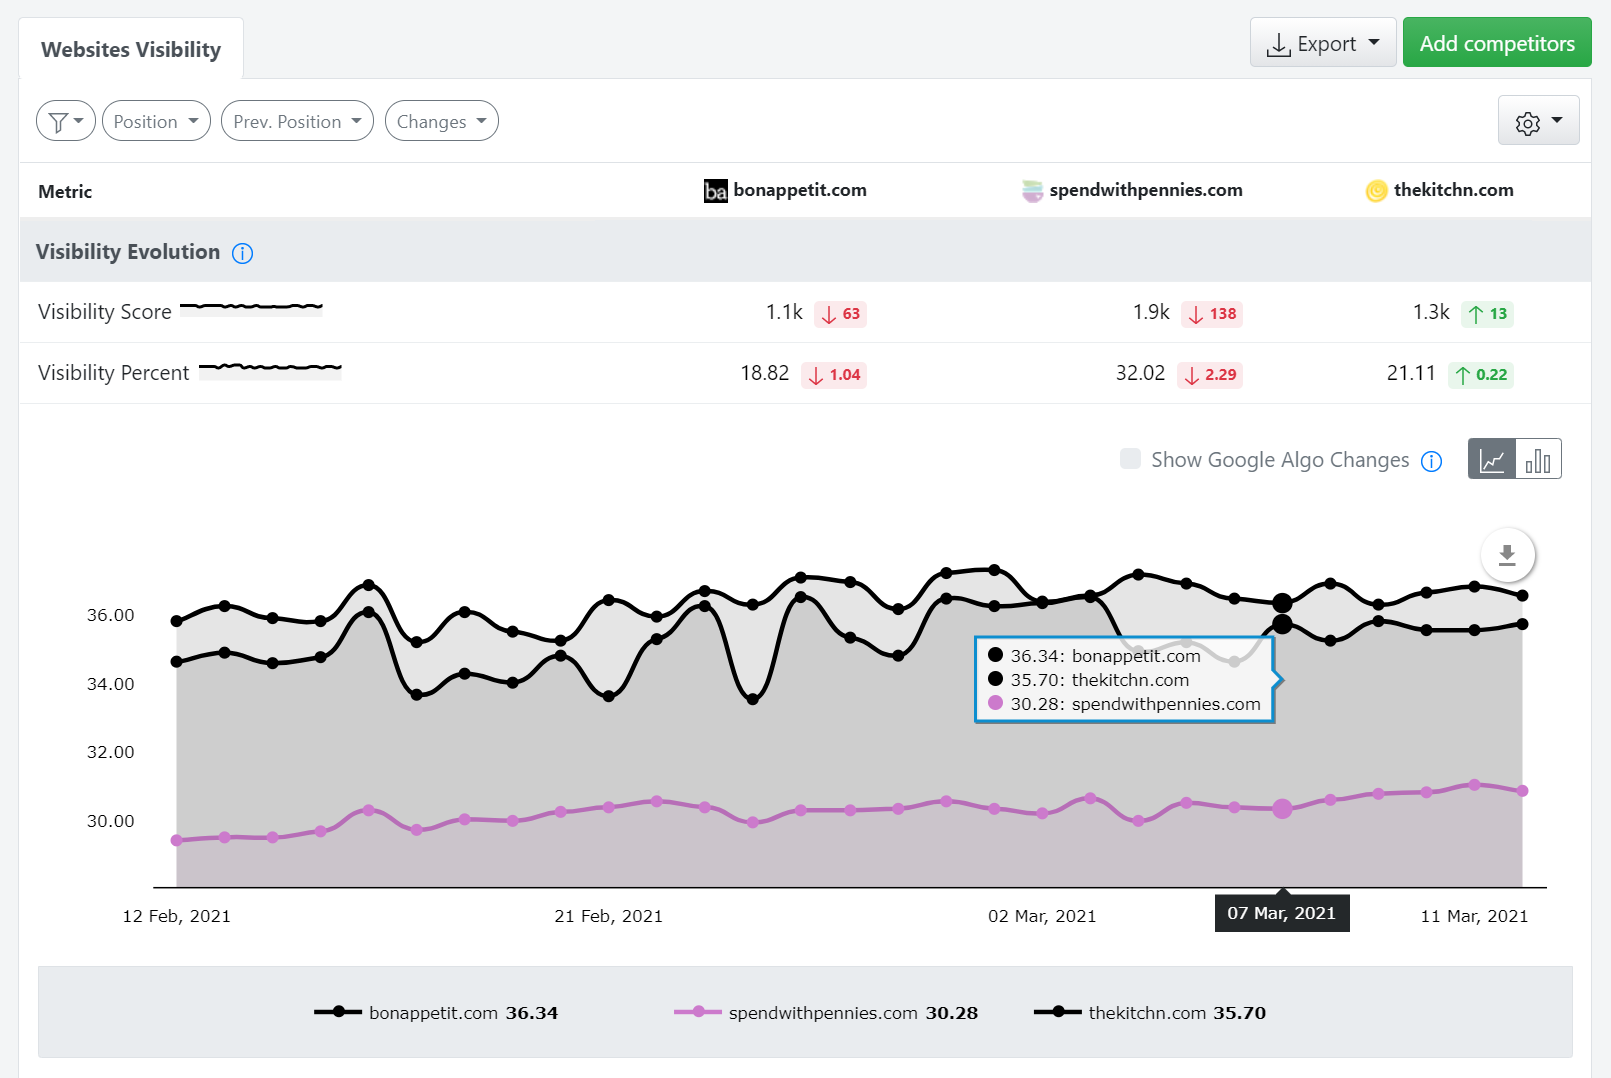 Track and compare competitors' rankings over time with Advanced Web Ranking rank tracker.